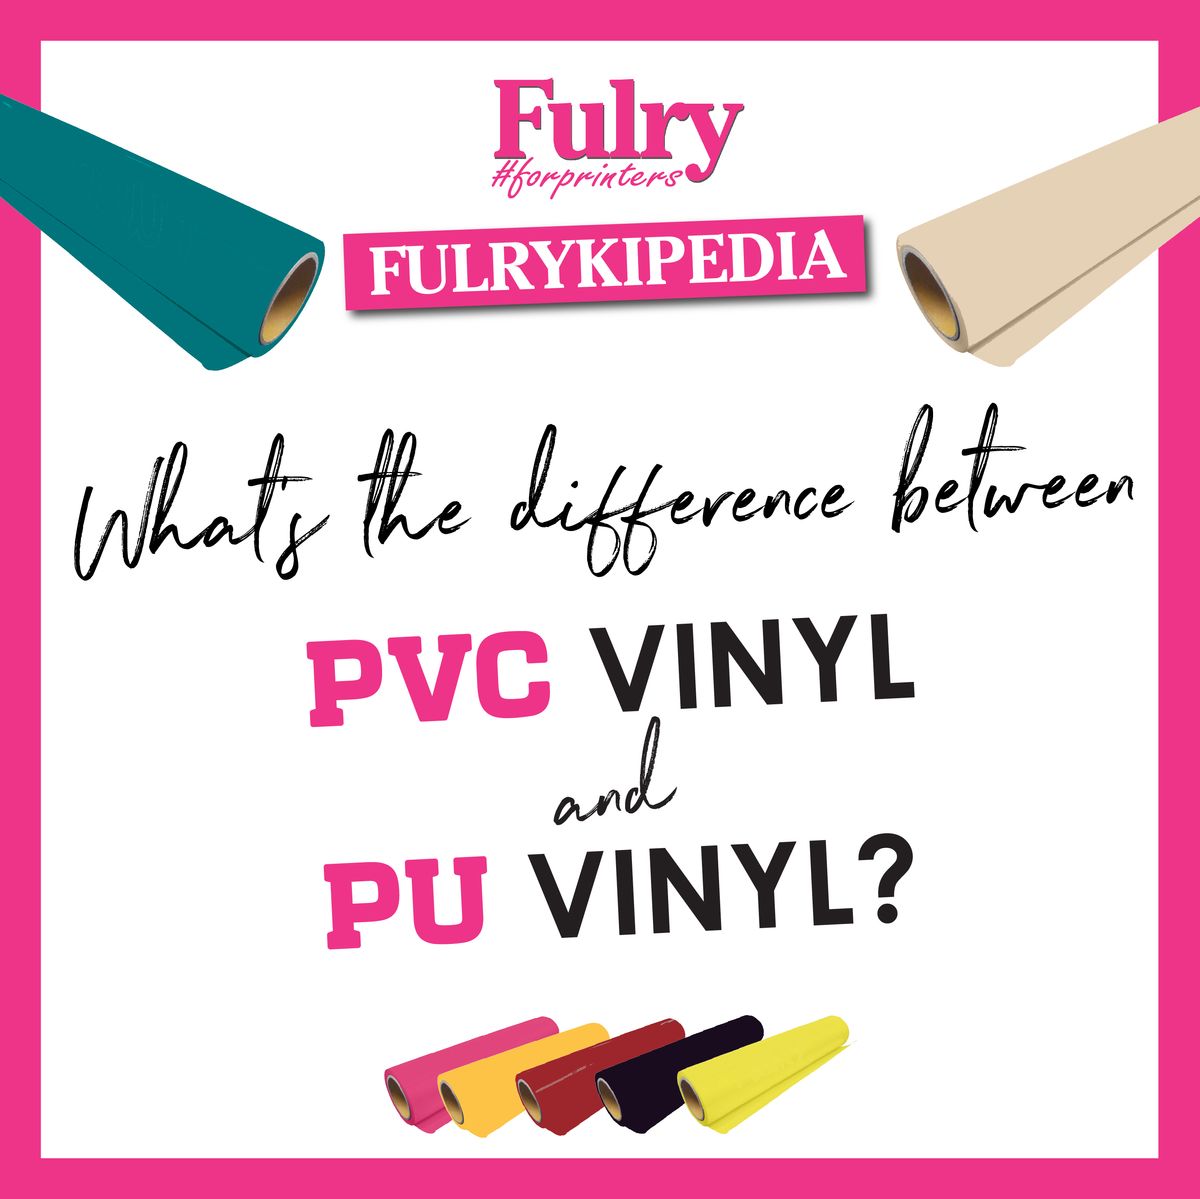 PVC VINYL & PU VINYL : What's the difference?